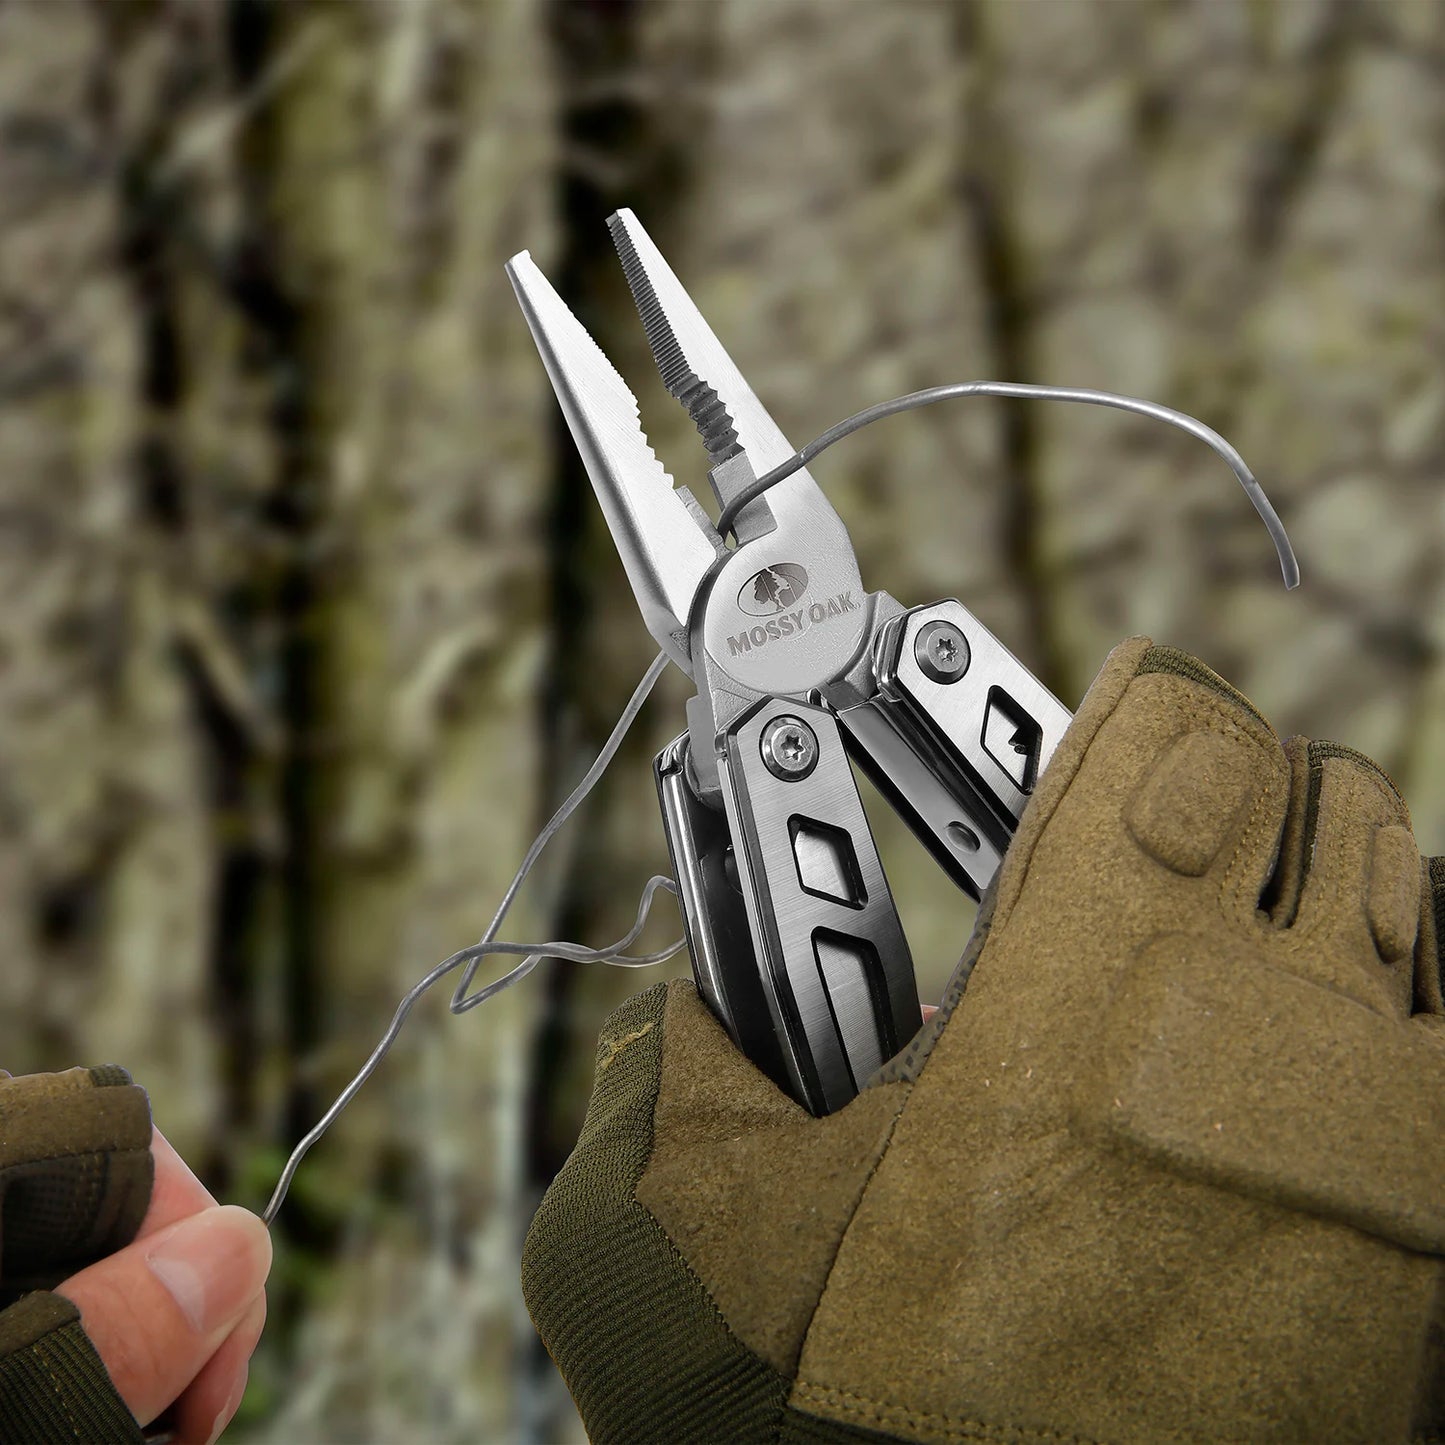 MOSSY OAK 21 in 1 Multi Function Pliers Stainless Steel Portable Pocket Knife with Sheath for Outdoors Survival Camping